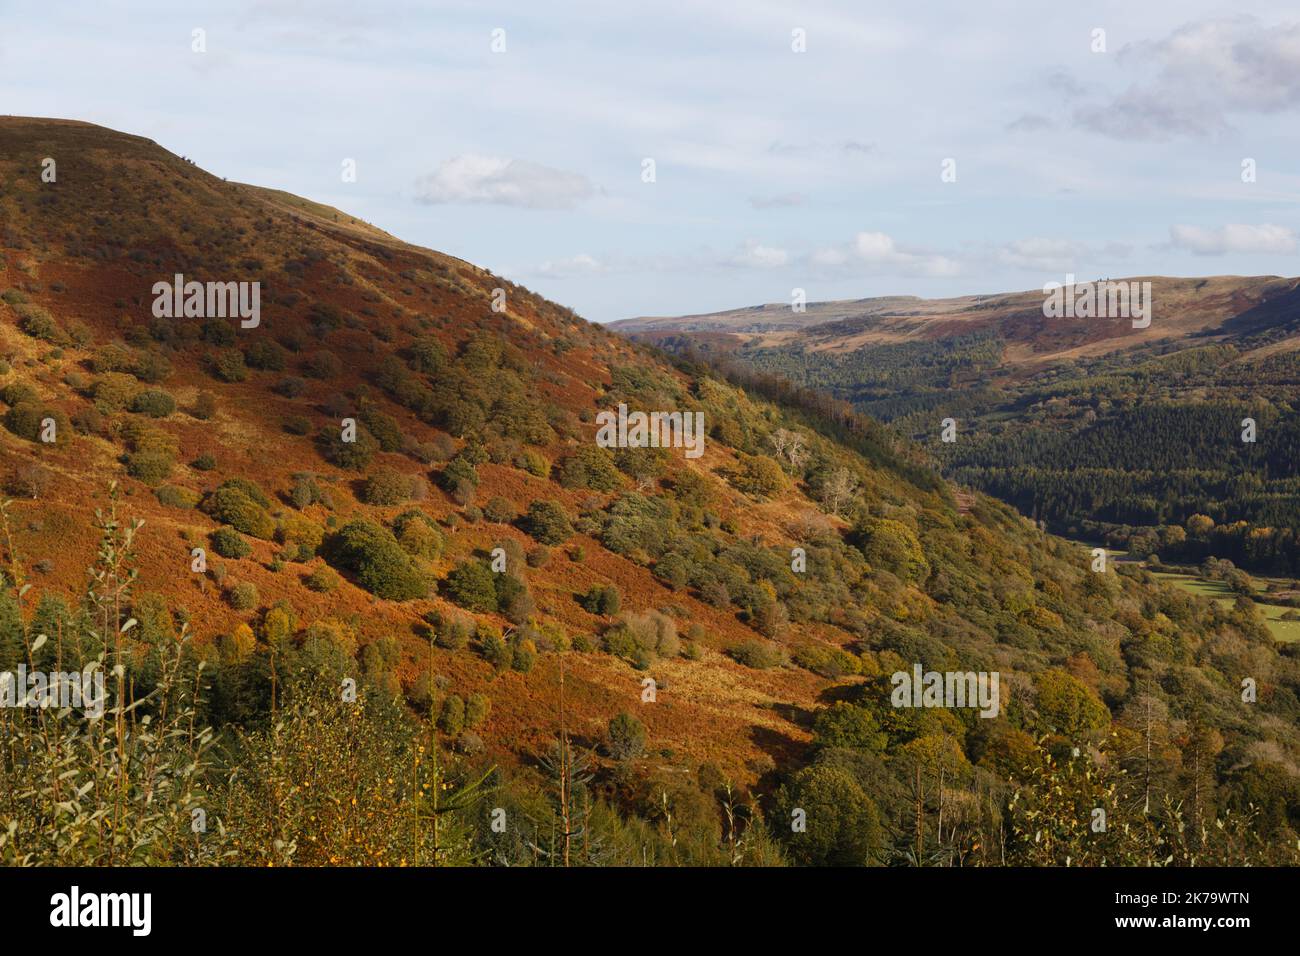 Talybont, South Wales, UK.  17 October '22.  UK weather: A sunny afternoon over the mountains.  Credit: Andrew Bartlett/Alamy Live News. Stock Photo